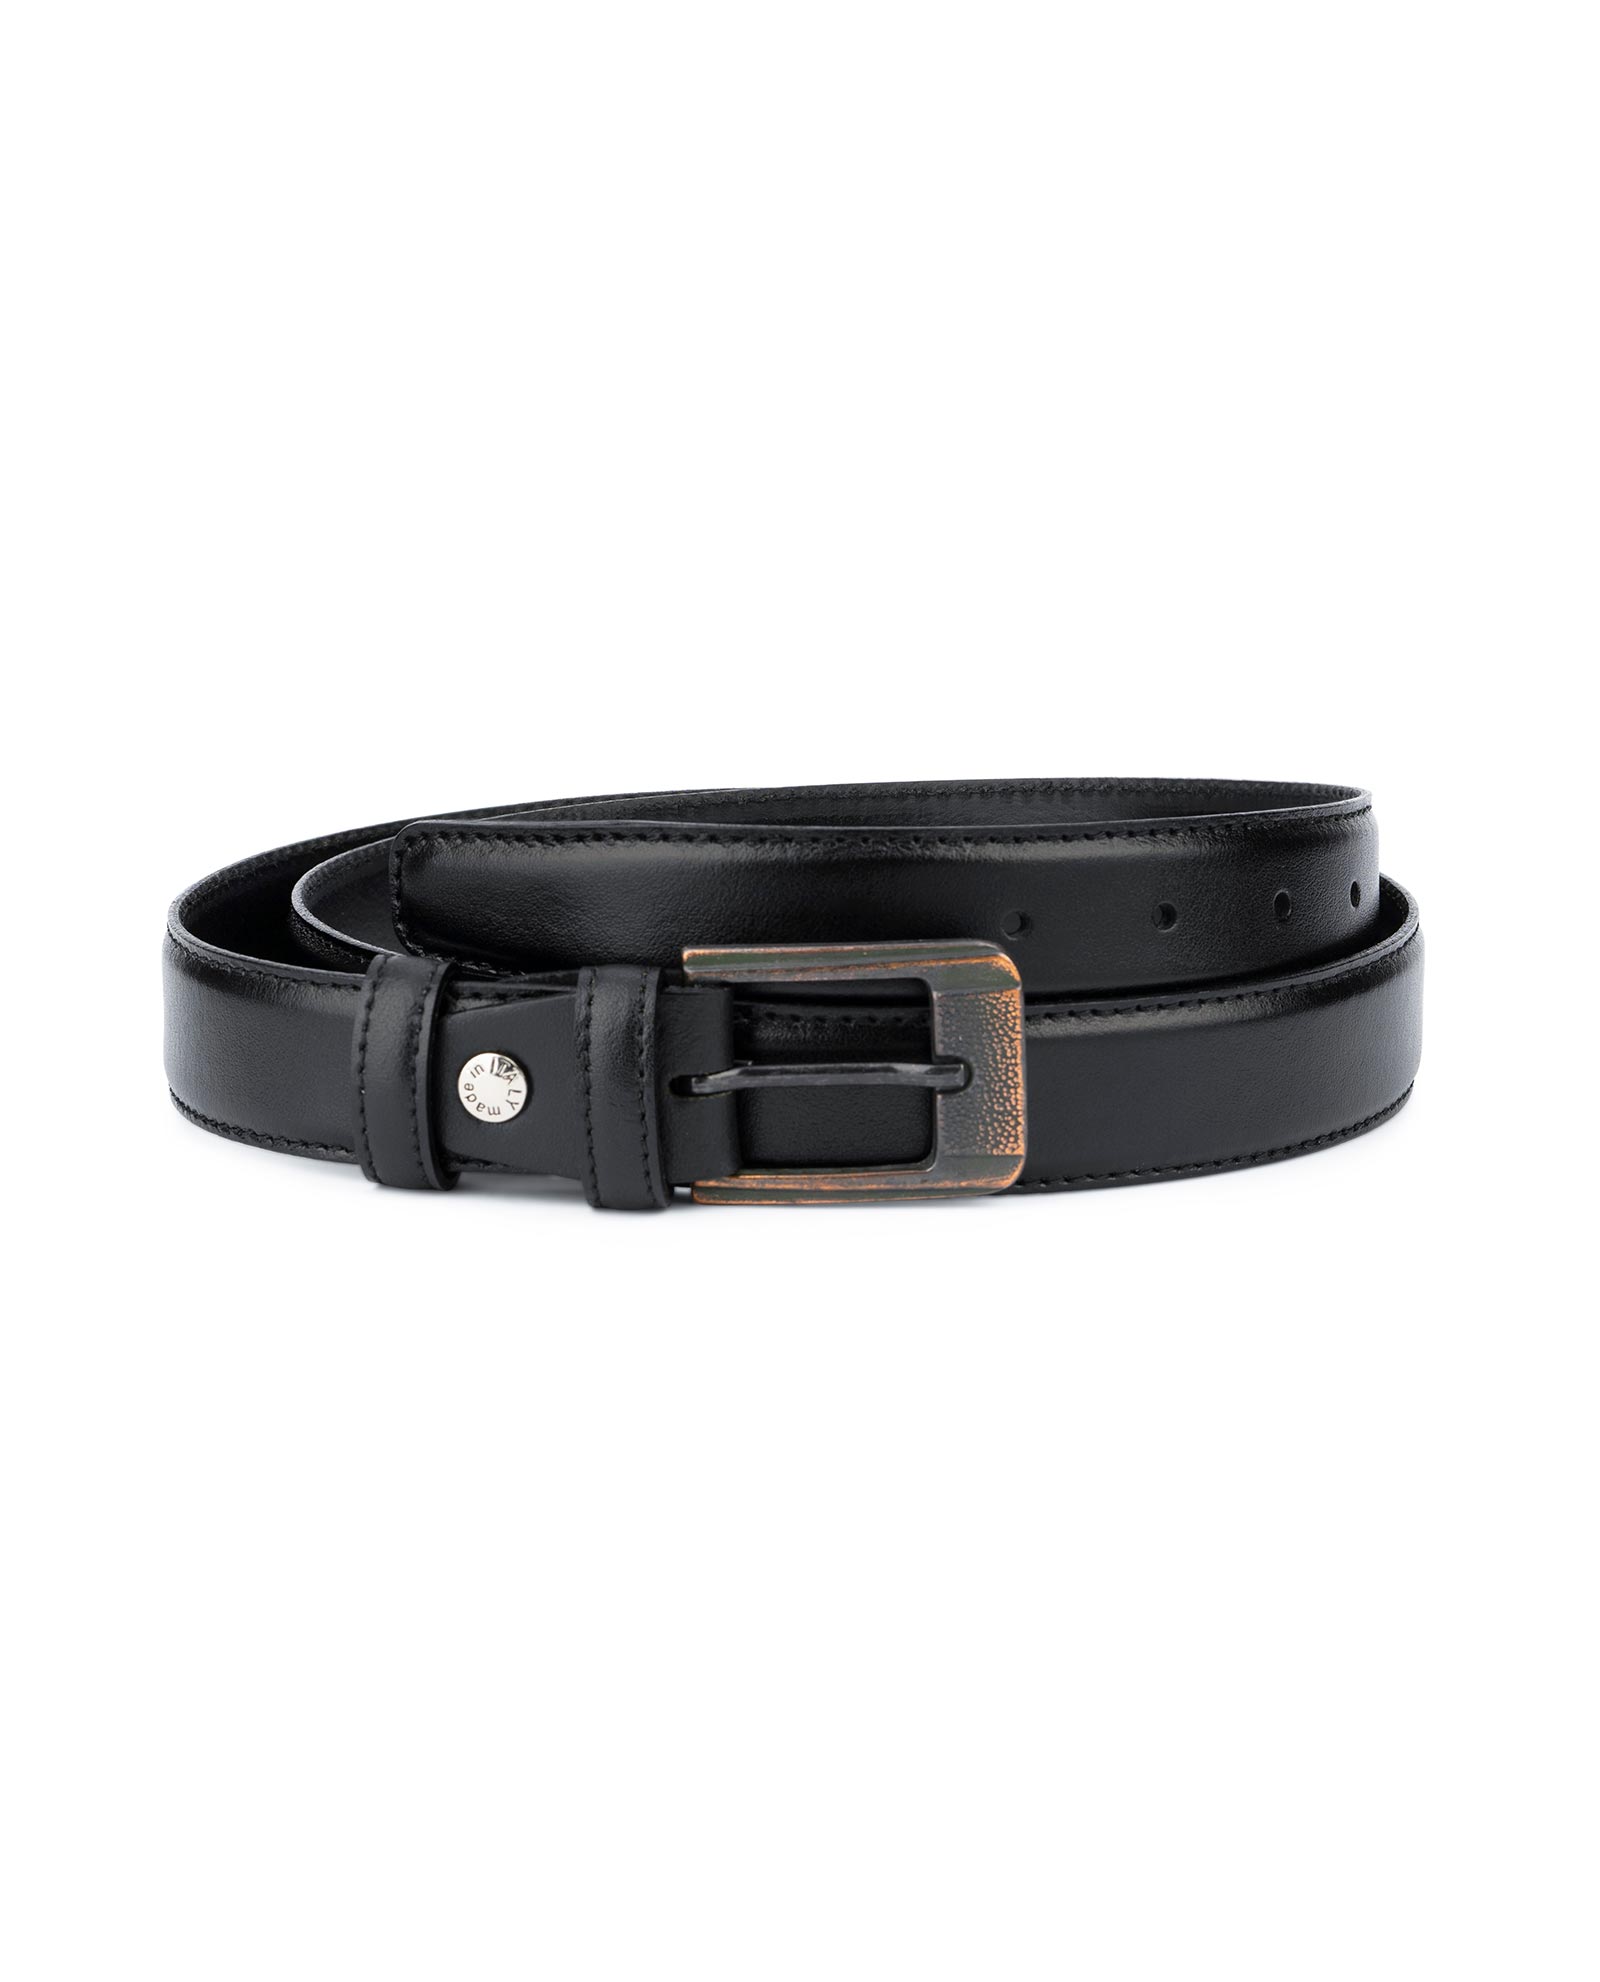 Buy Black Belt with Copper buckle | Real Leather | Capo Pelle